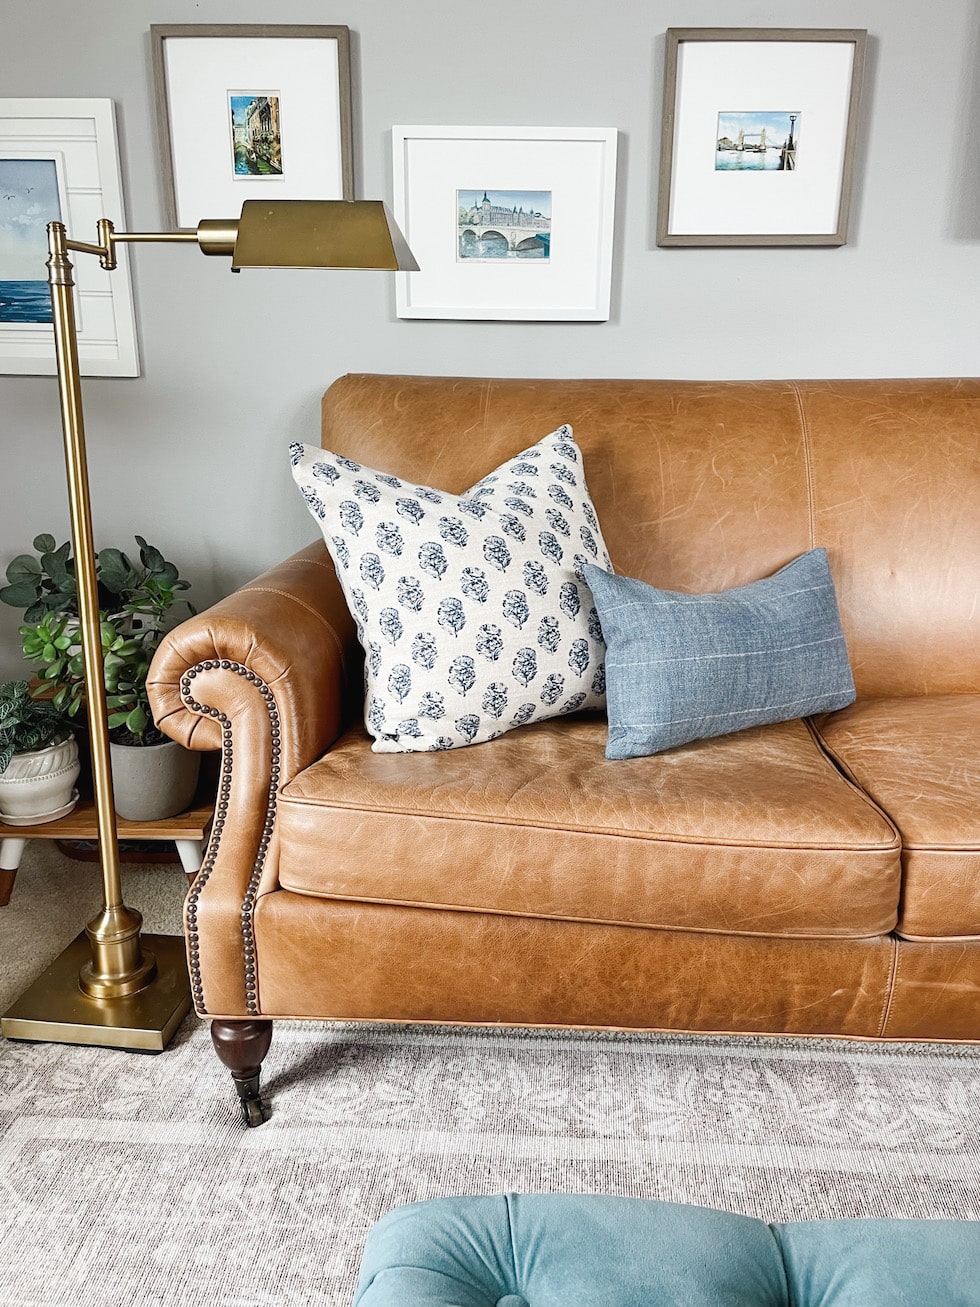 How to Pick Decorative Pillows That Go Together (5 tips on style, pillow inserts and saving money!)